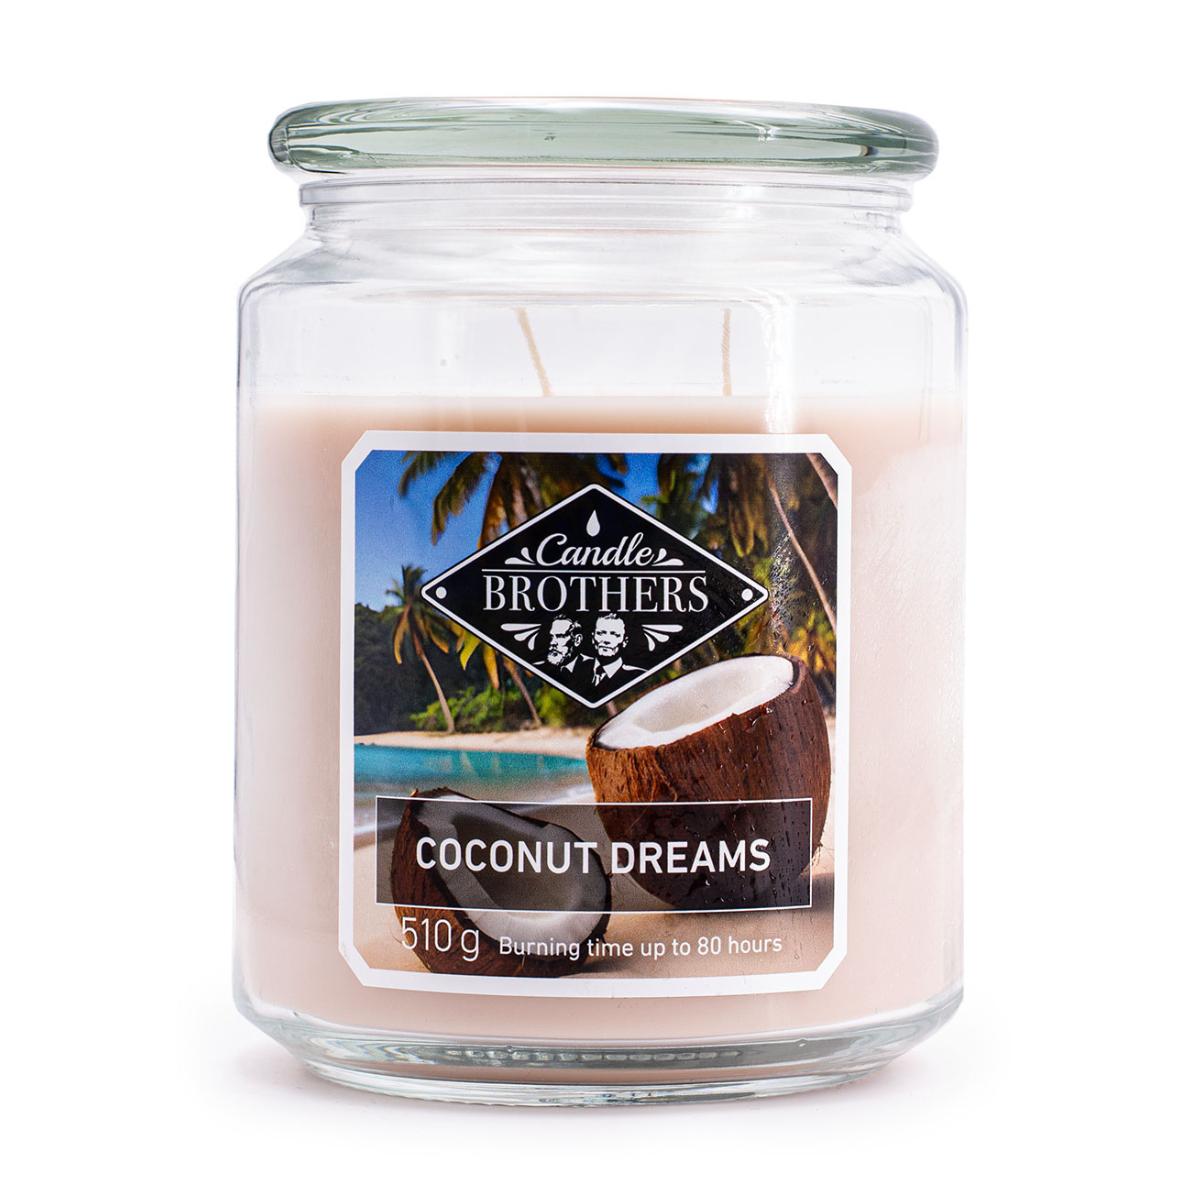 Coconut Dreams - Duftkerze 510g von Candle Brothers